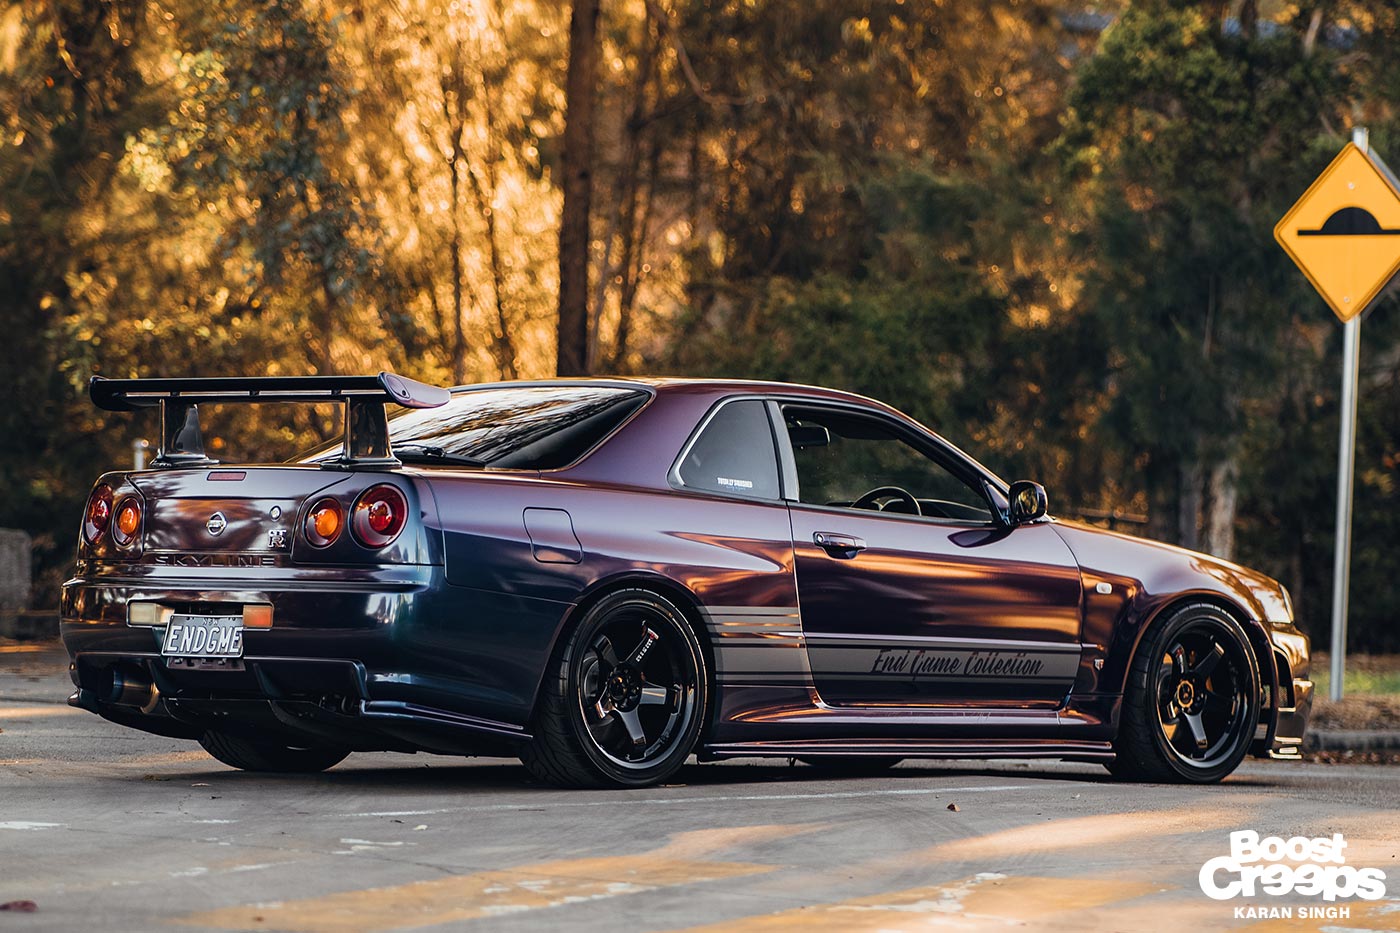 R34 GTR “END GAME”: Imperfect Perfection